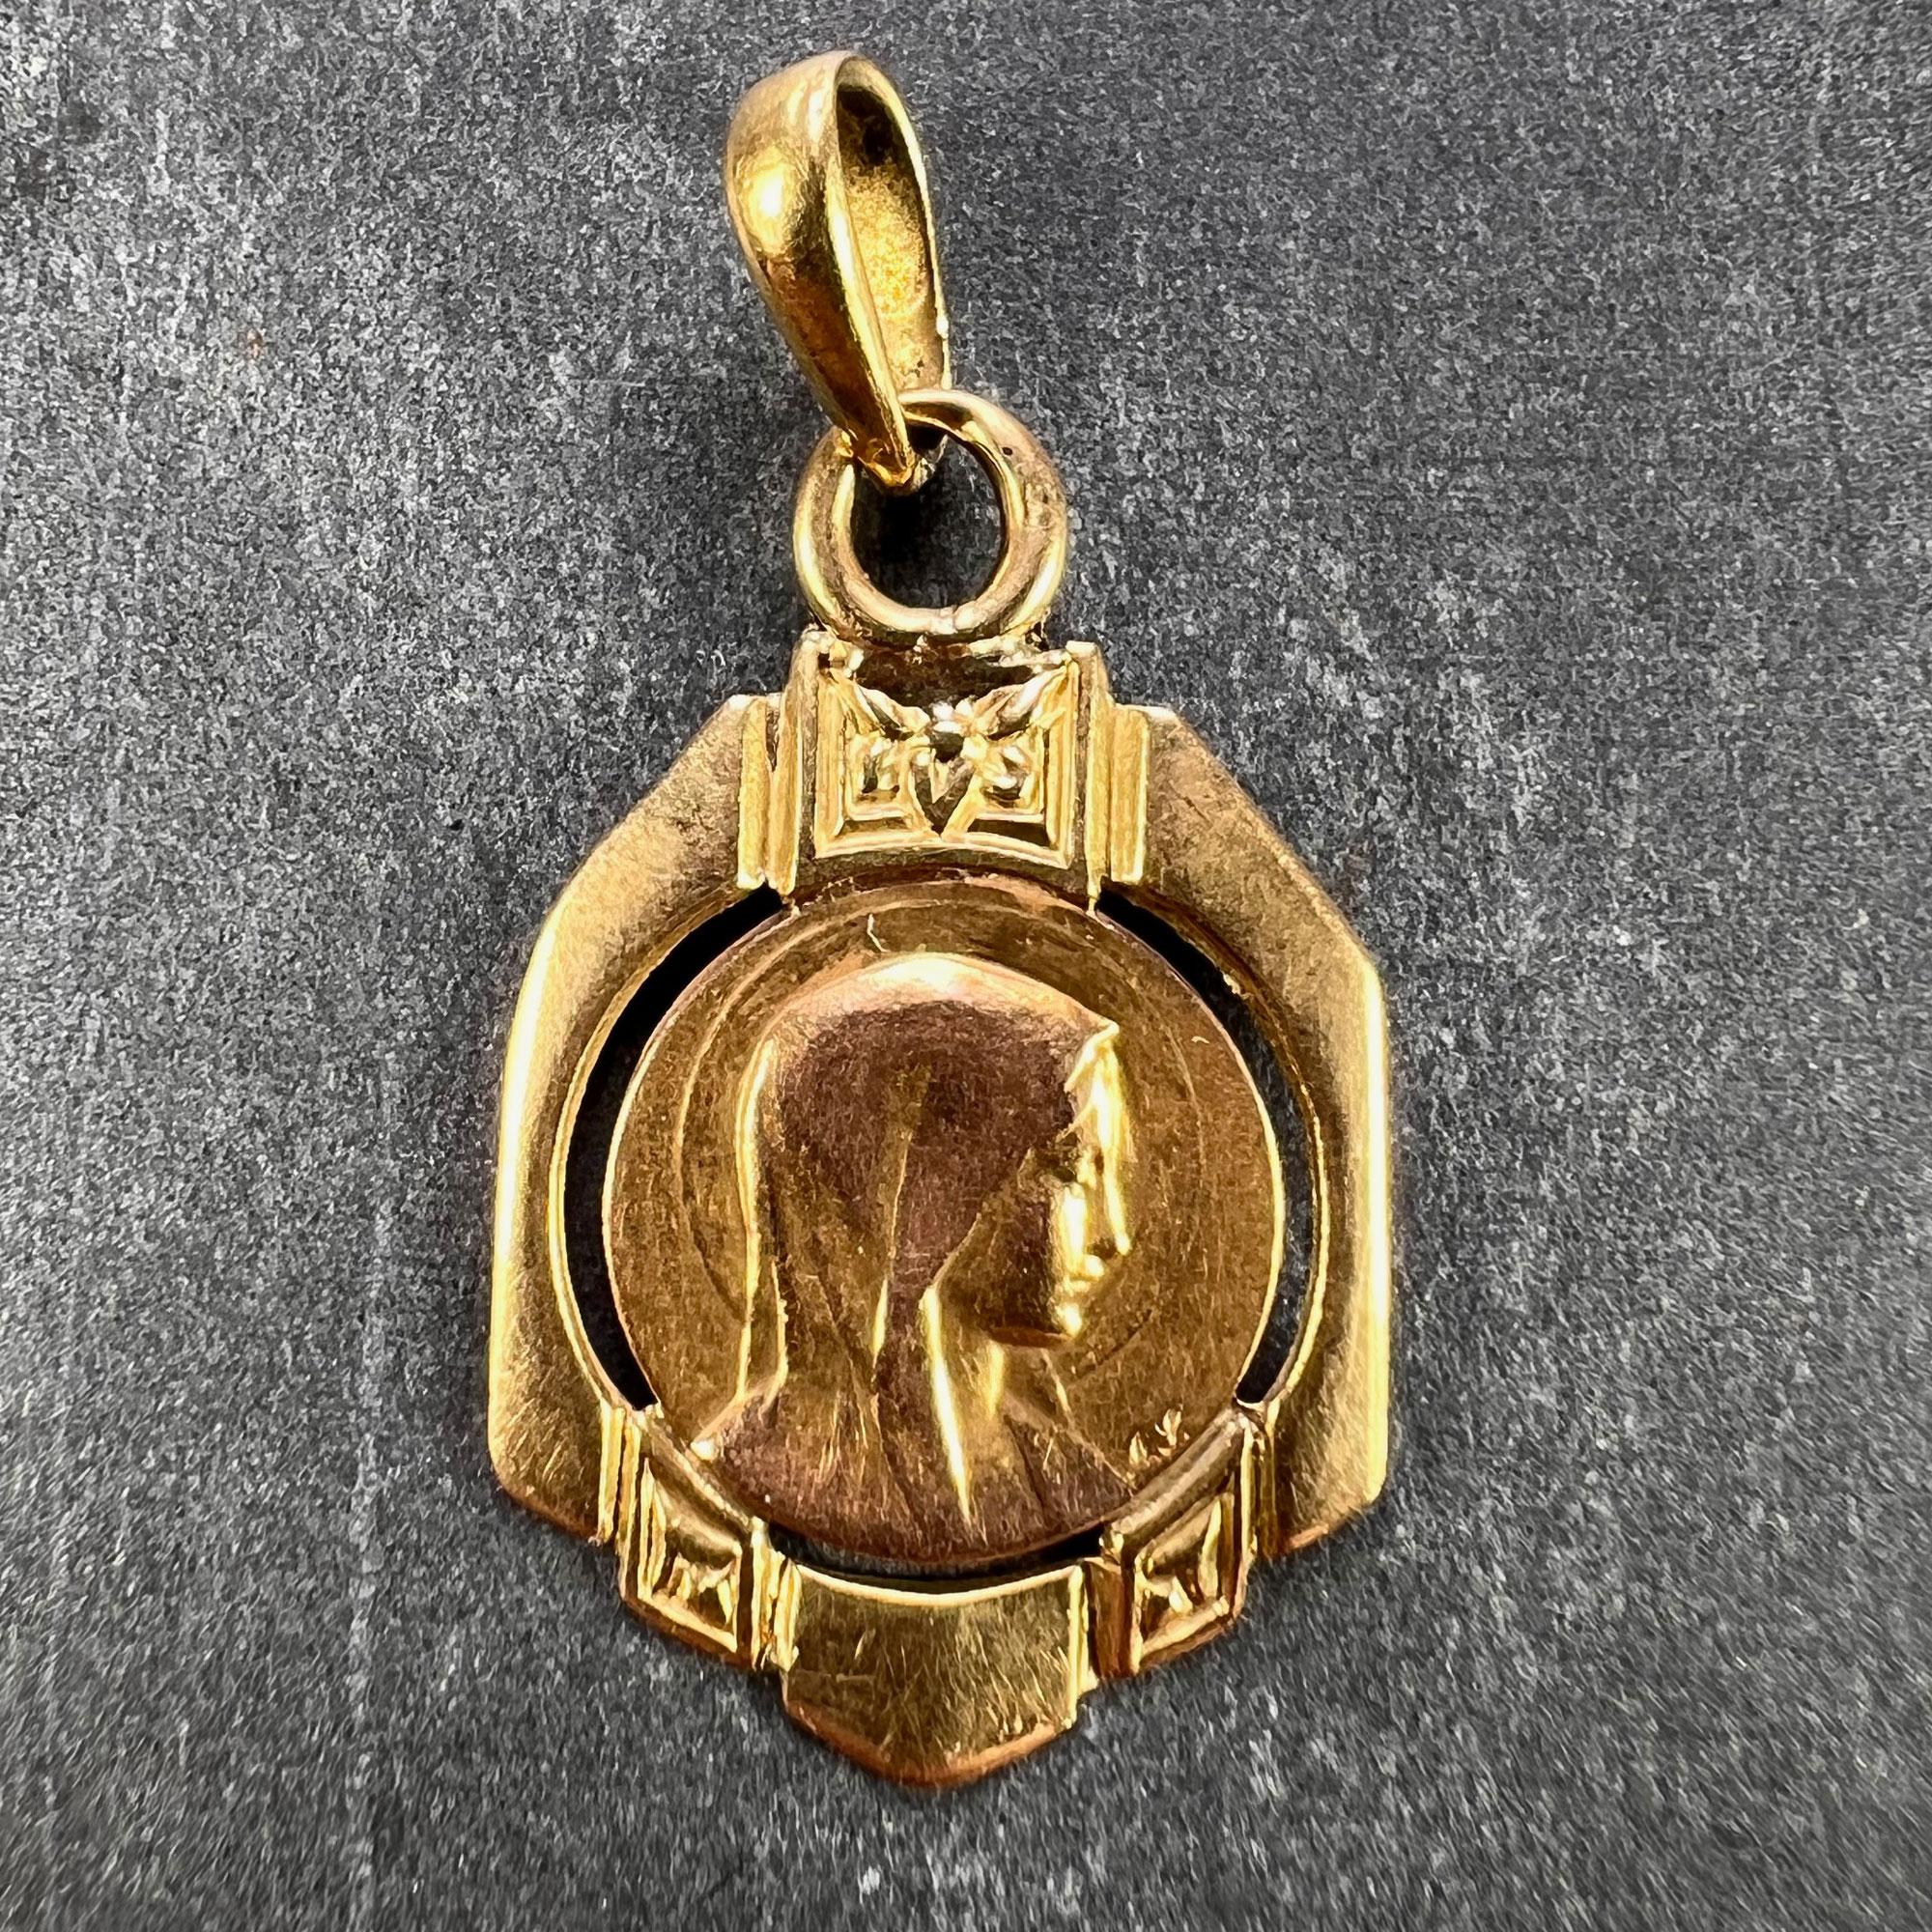 A French 18 karat (18K) yellow gold charm pendant designed as a medal depicting the Virgin Mary signed AS within a yellow gold frame with geometric stripes of heart and floral decoration. The reverse of the medal depicts Jesus Christ emerging from